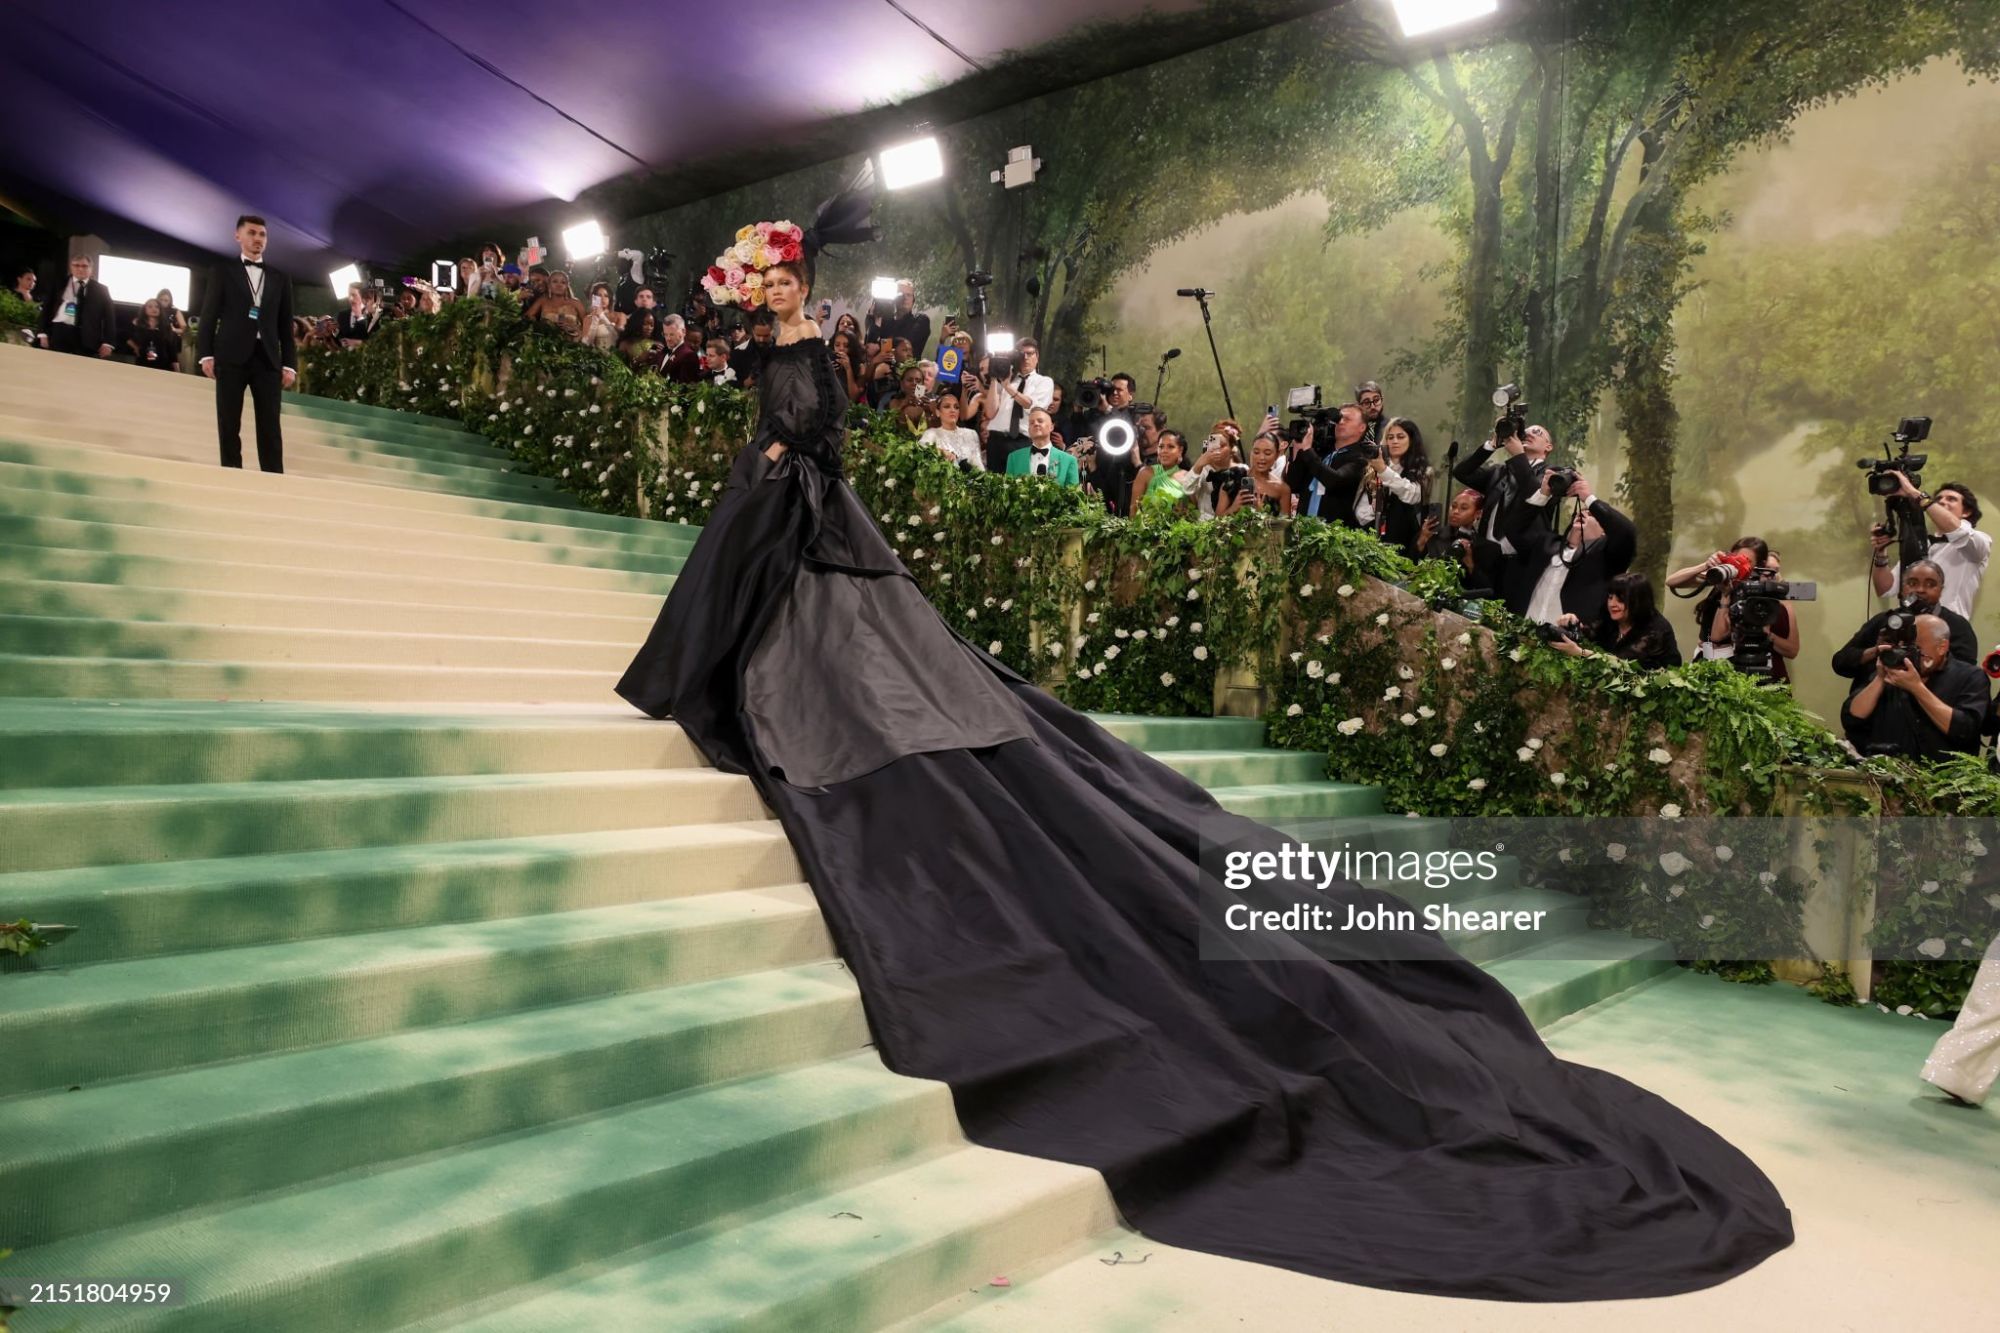 gettyimages-2151804959-2048x2048.jpg